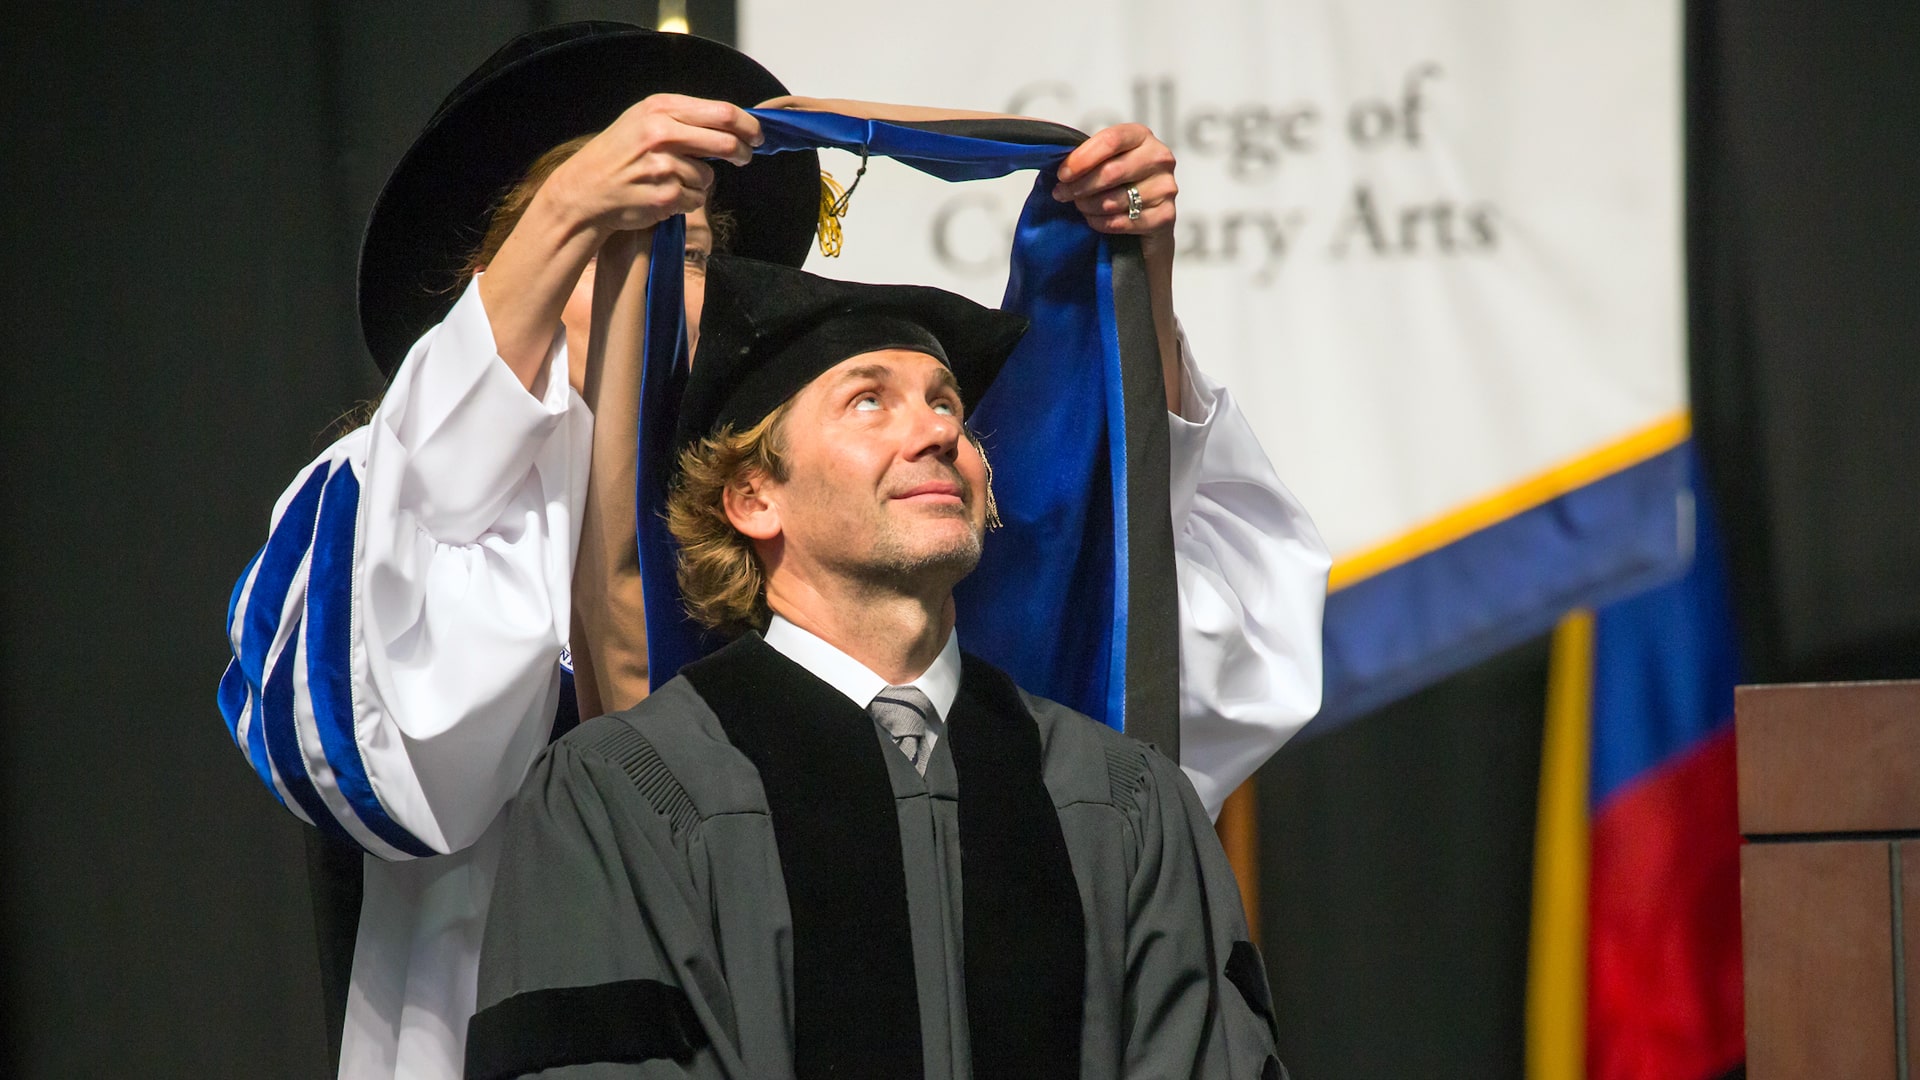 Chef Mehmet Gürs '93, '19 Hon. at 2019 JWU Providence Commencement